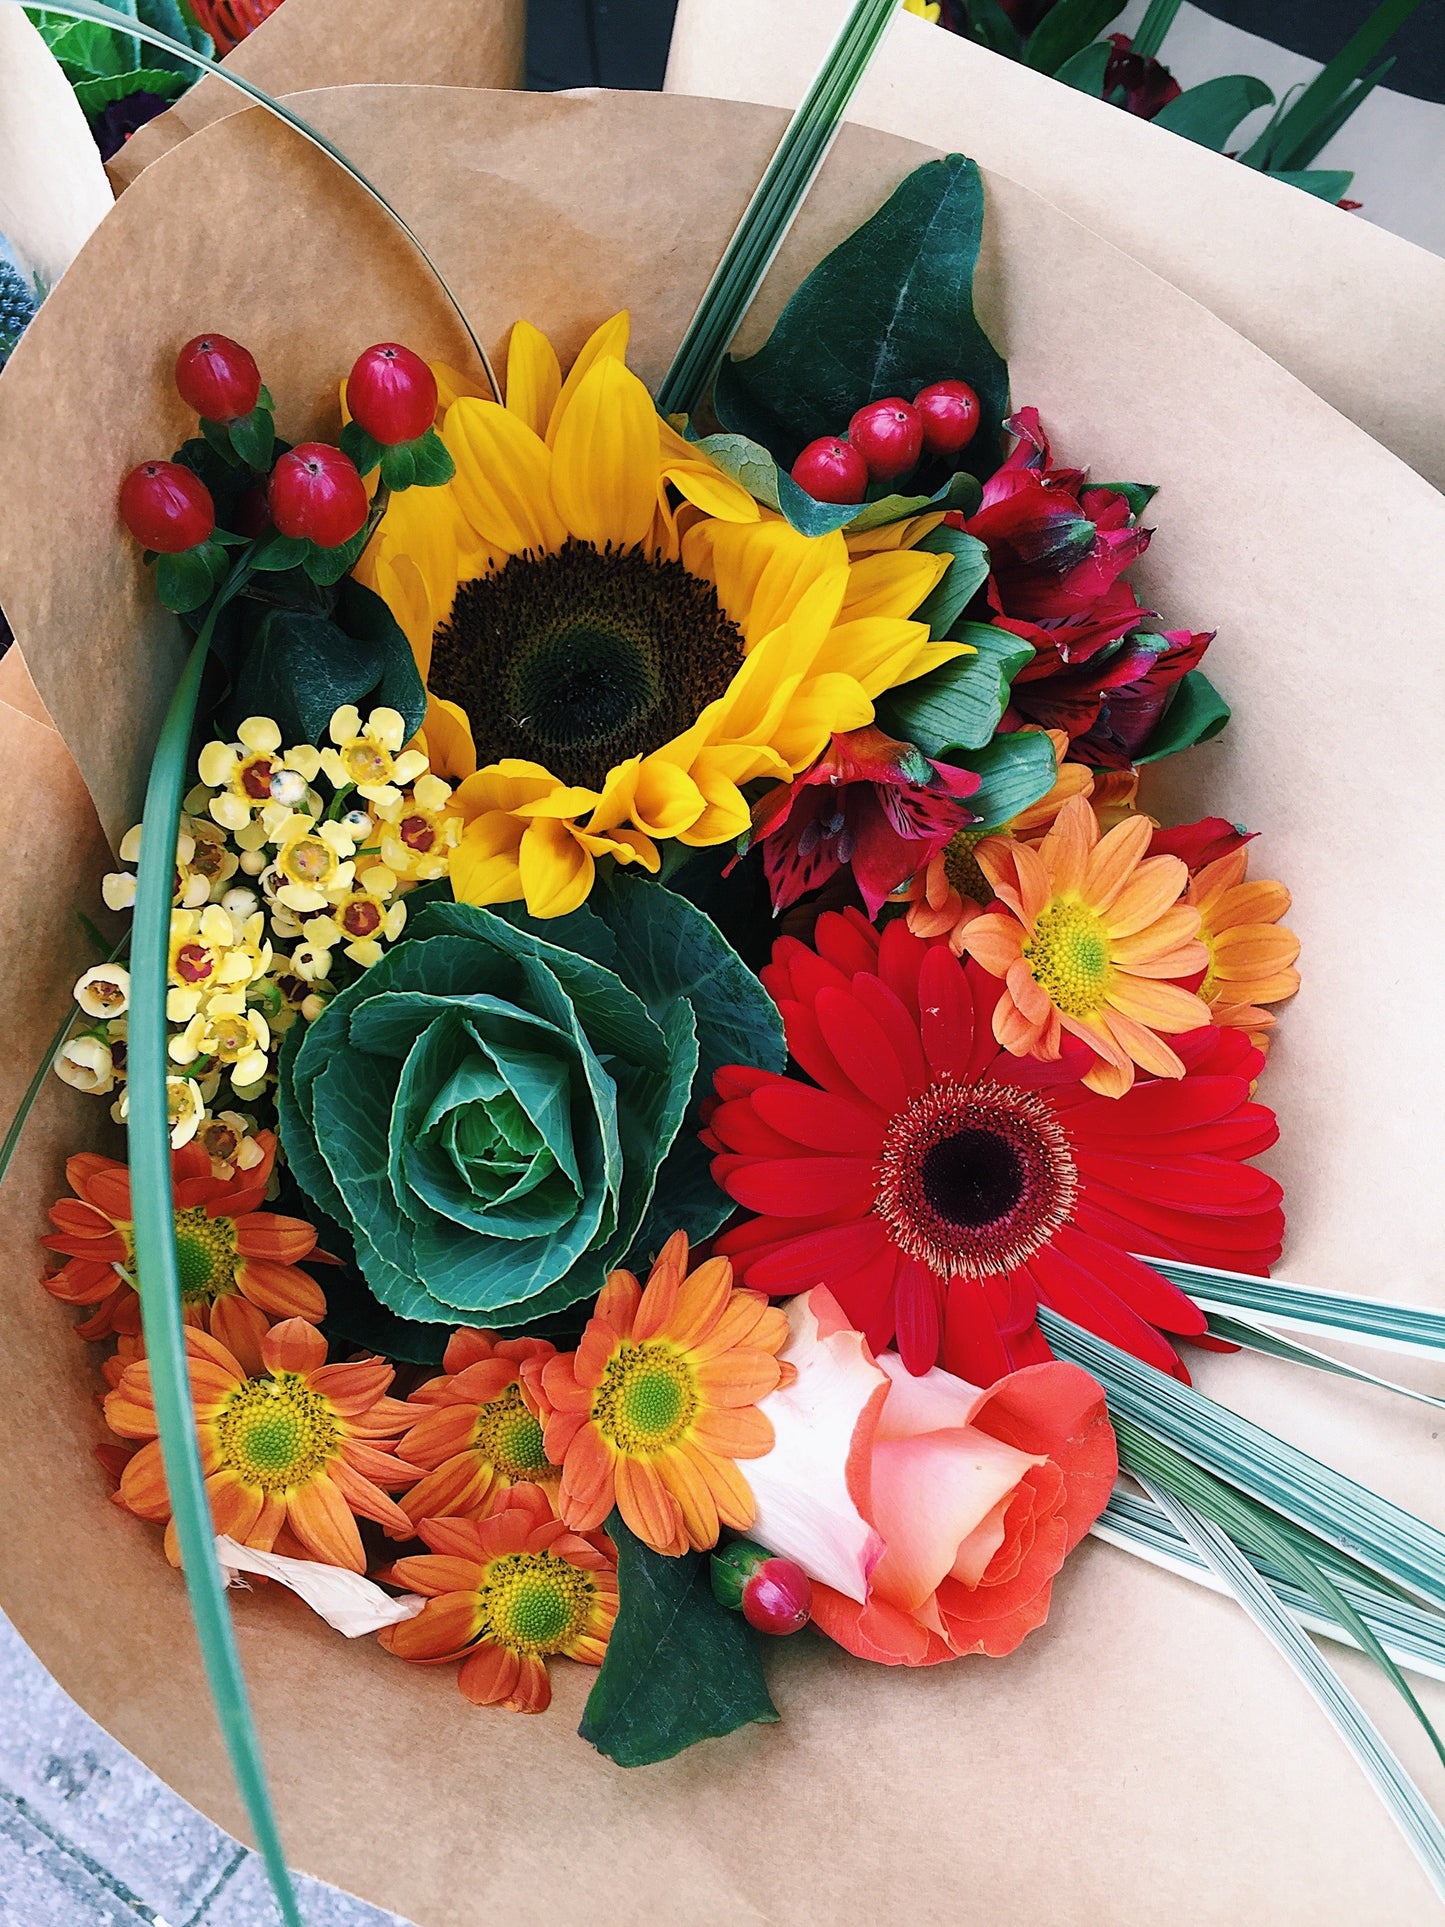 Monthly Designer's Choice Floral Subscription